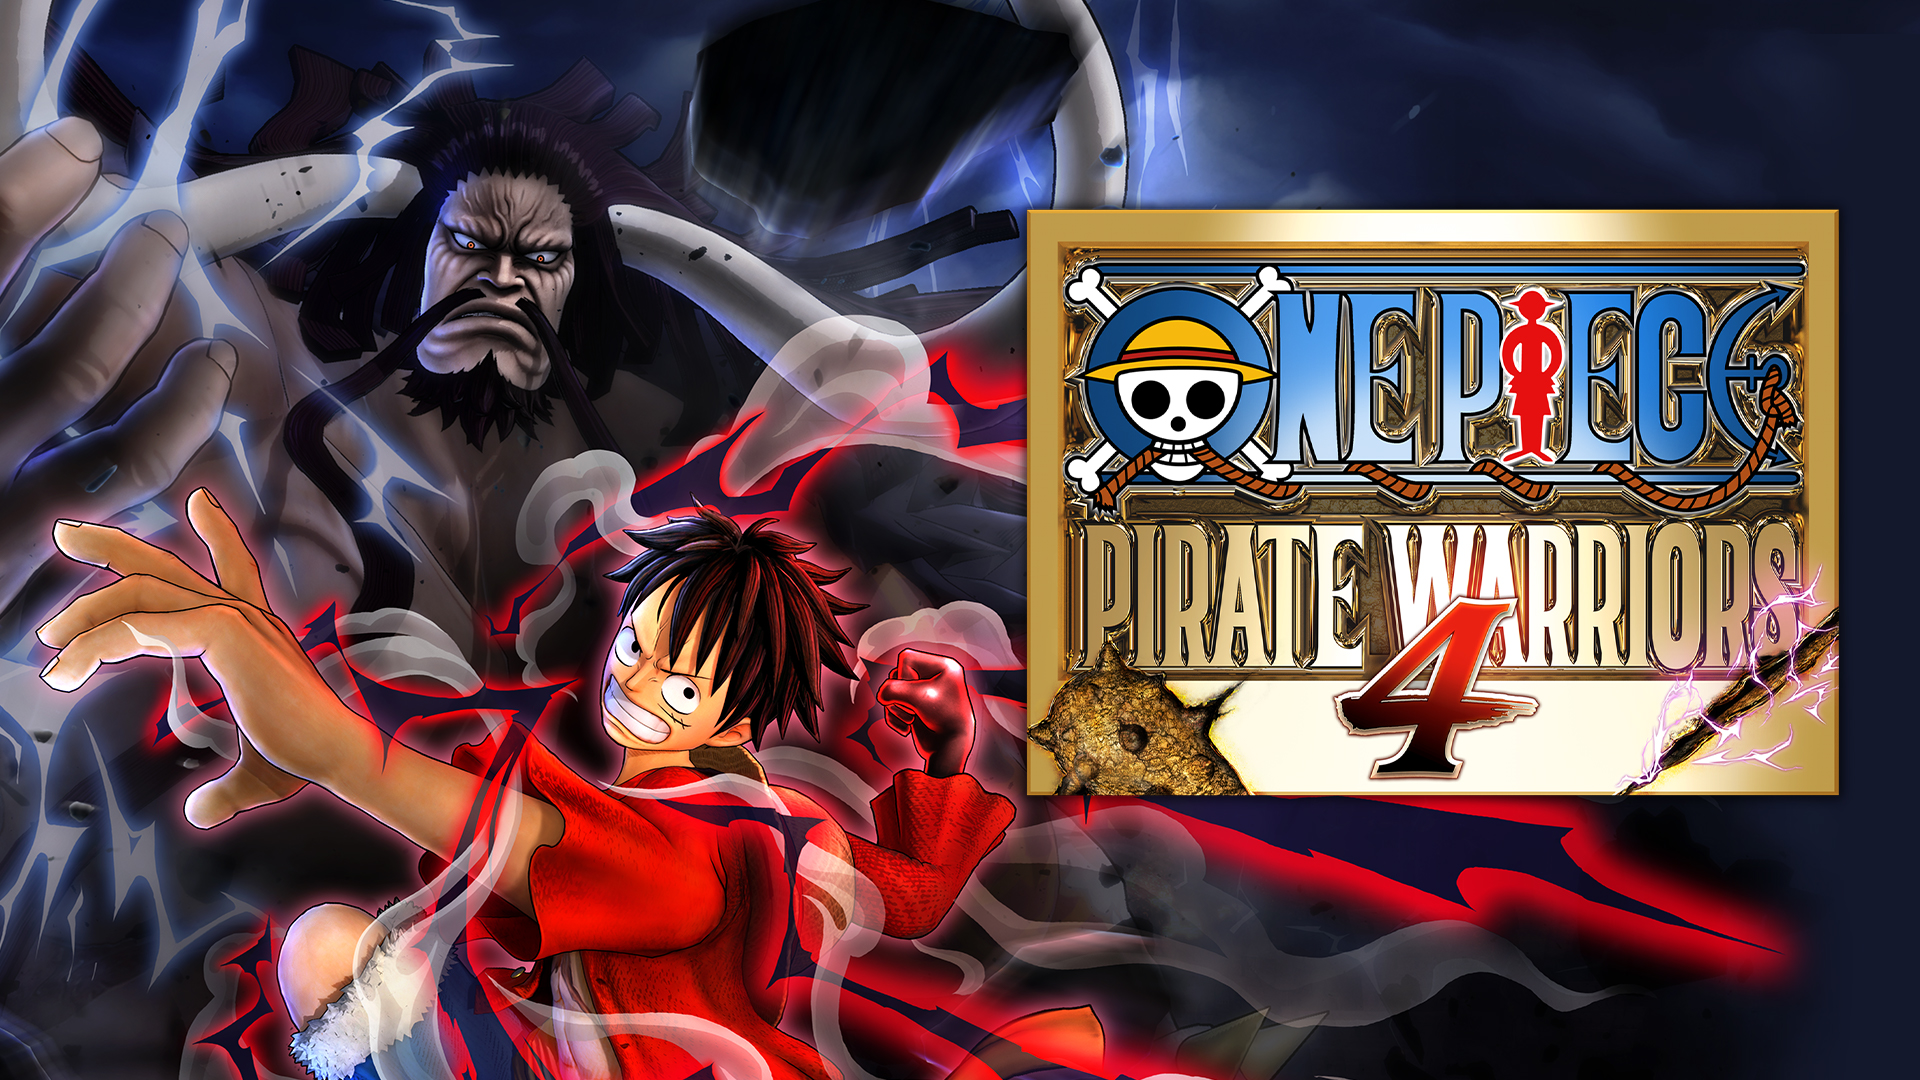 ONE PIECE: PIRATE WARRIORS 4 for Nintendo Switch Game Details